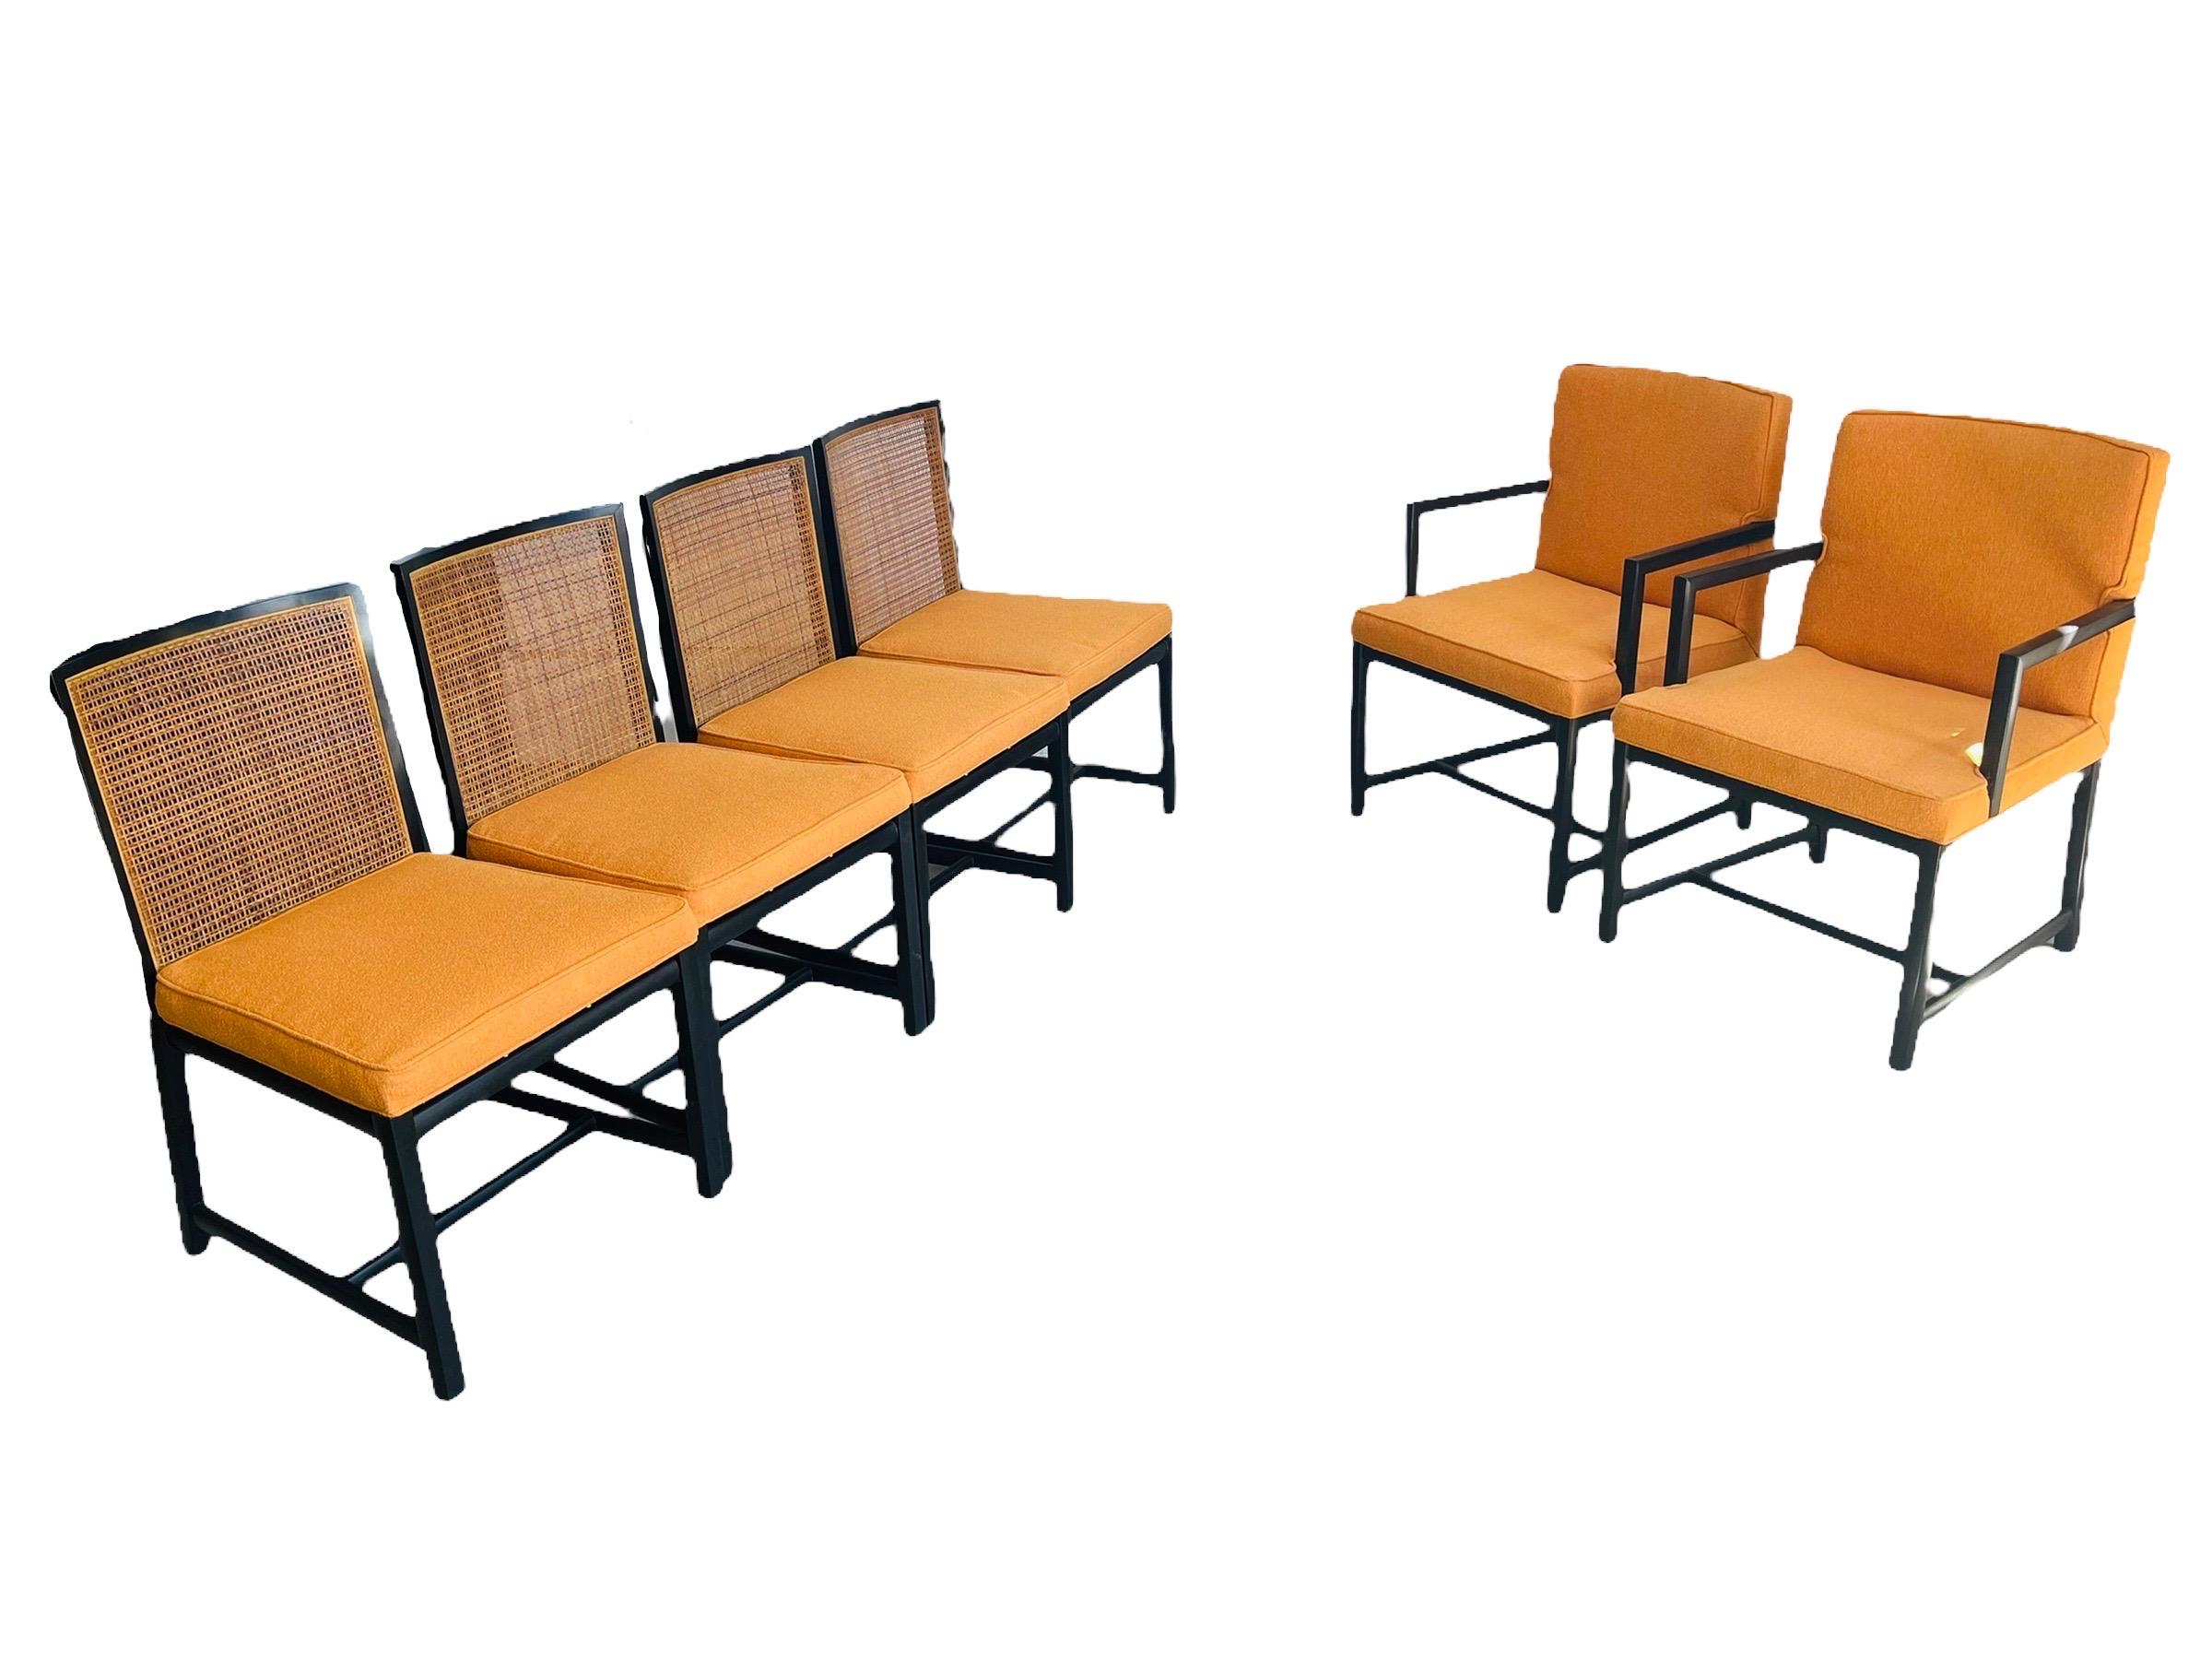 Stunning rare set of 6 cane back with black lacquer frame dining chairs designed by Michael Taylor for Baker Furniture Circa 1960. This set includes two captain chairs and 4 side chairs. This set is in good vintage condition with normal wear